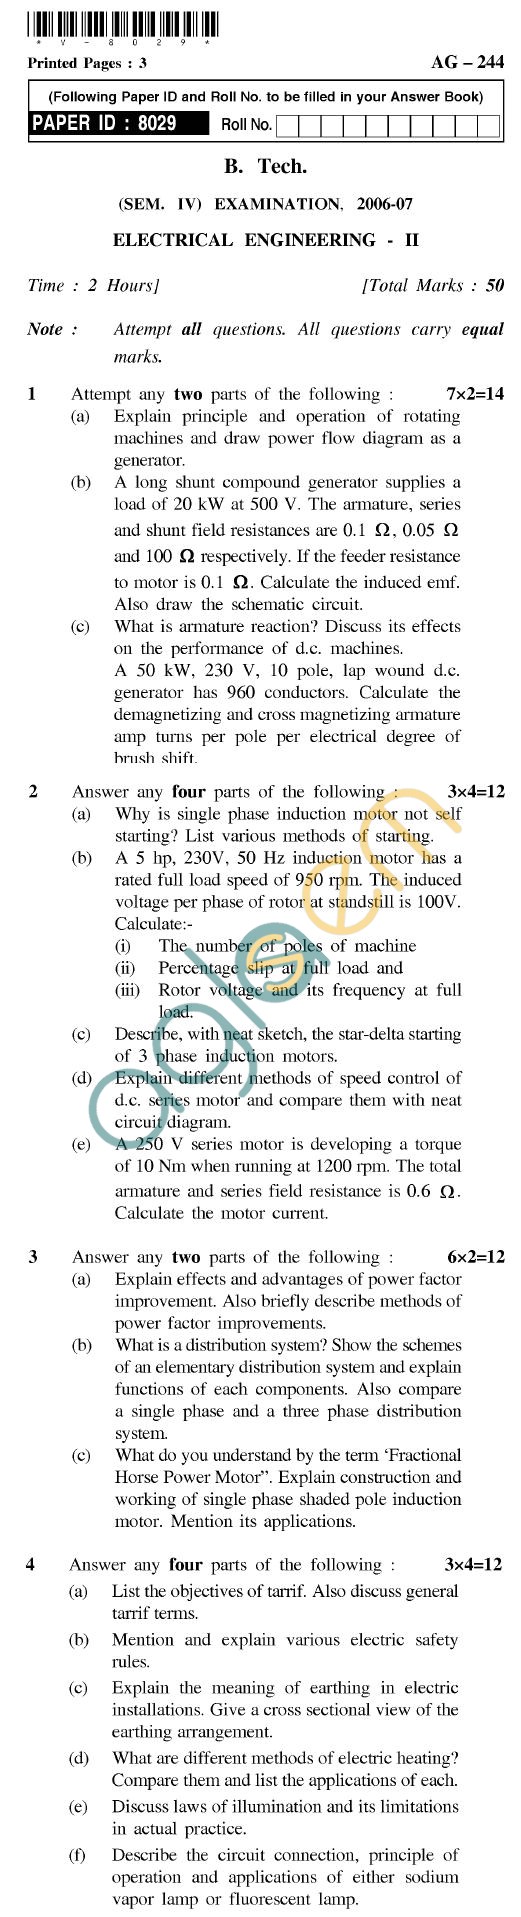 UPTU B.Tech Question Papers - AG-244 - Electrical Engineering-II